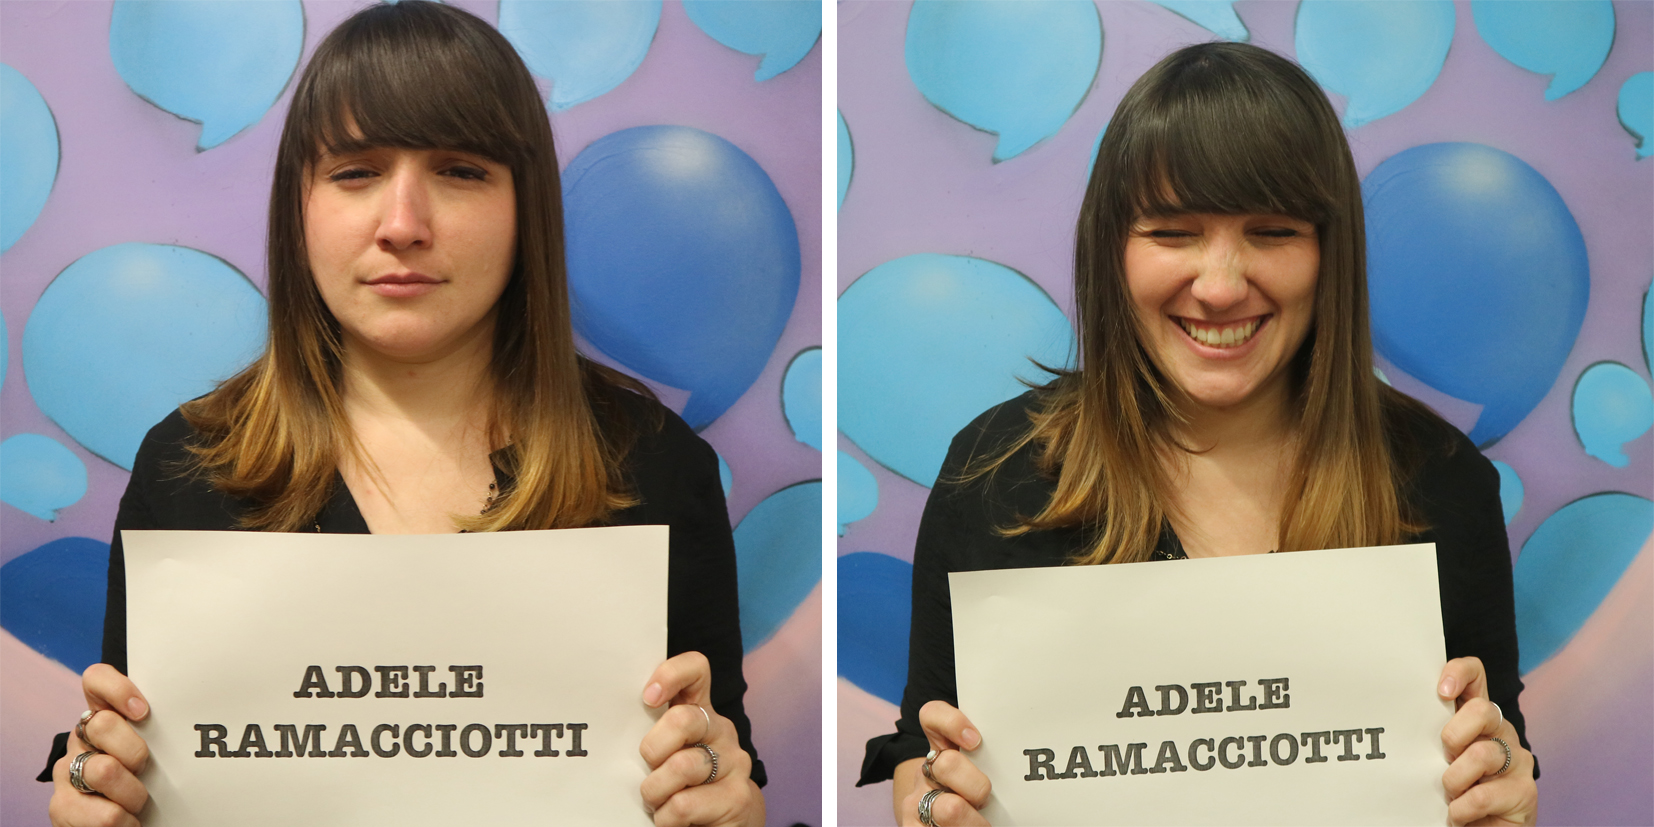 This is Adele Ramacciotti, new mobility project manager